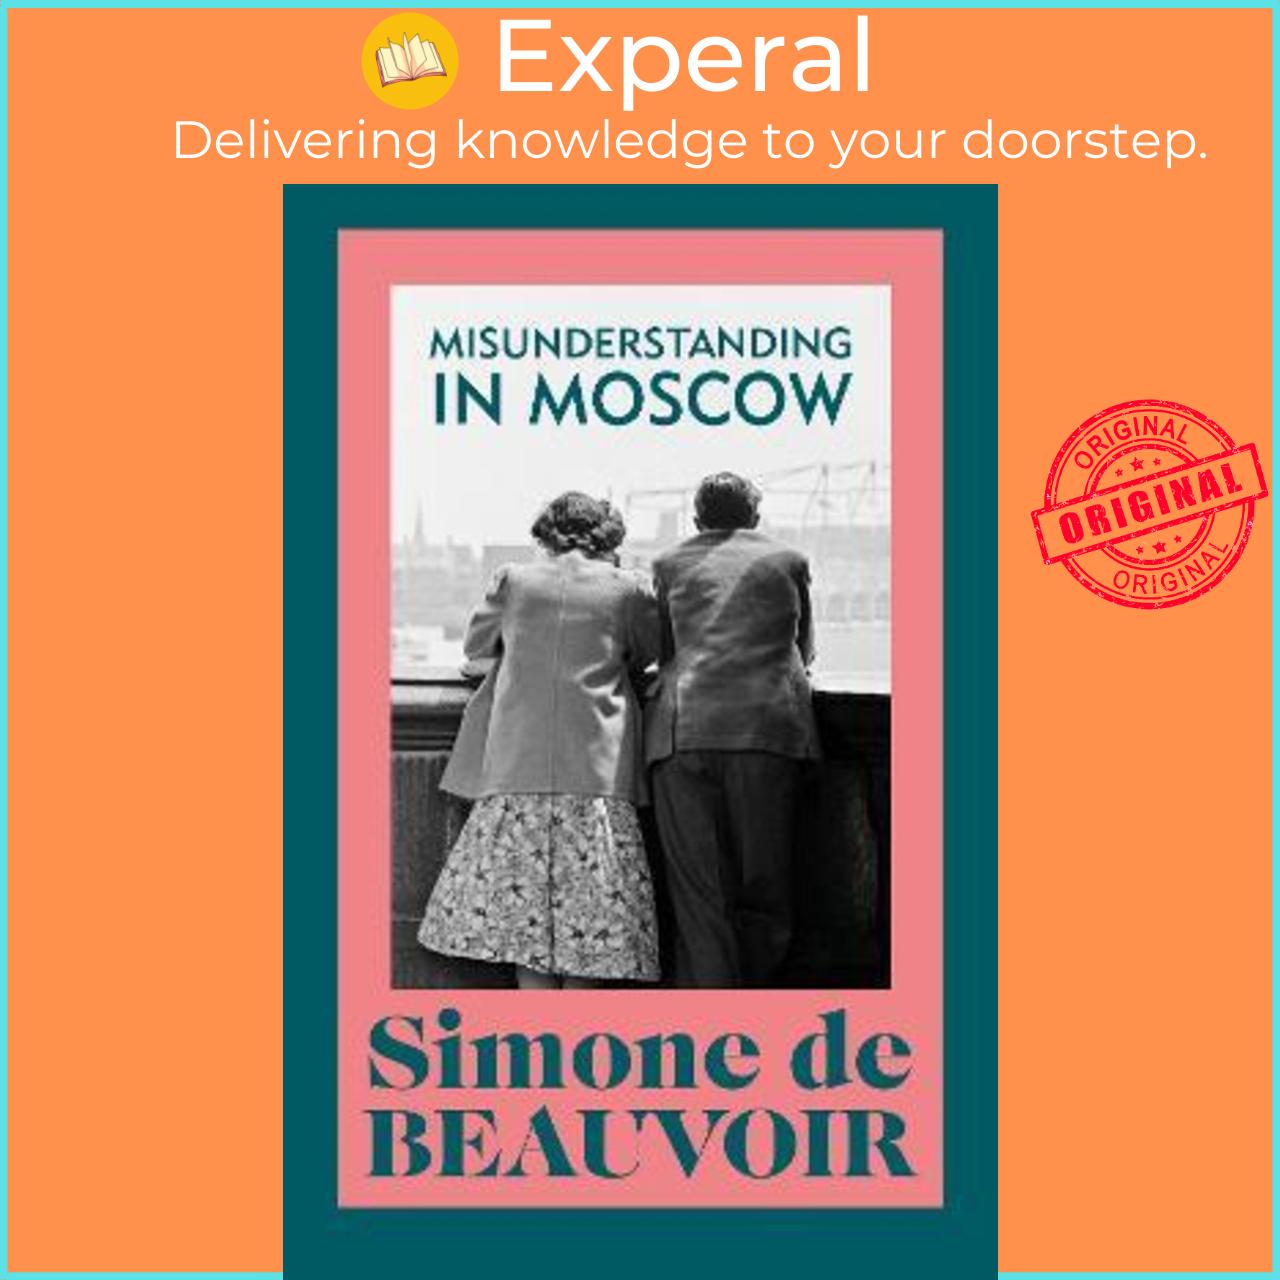 Sách - Misunderstanding in Moscow by Simone de Beauvoir,Terry Keefe (UK edition, paperback)